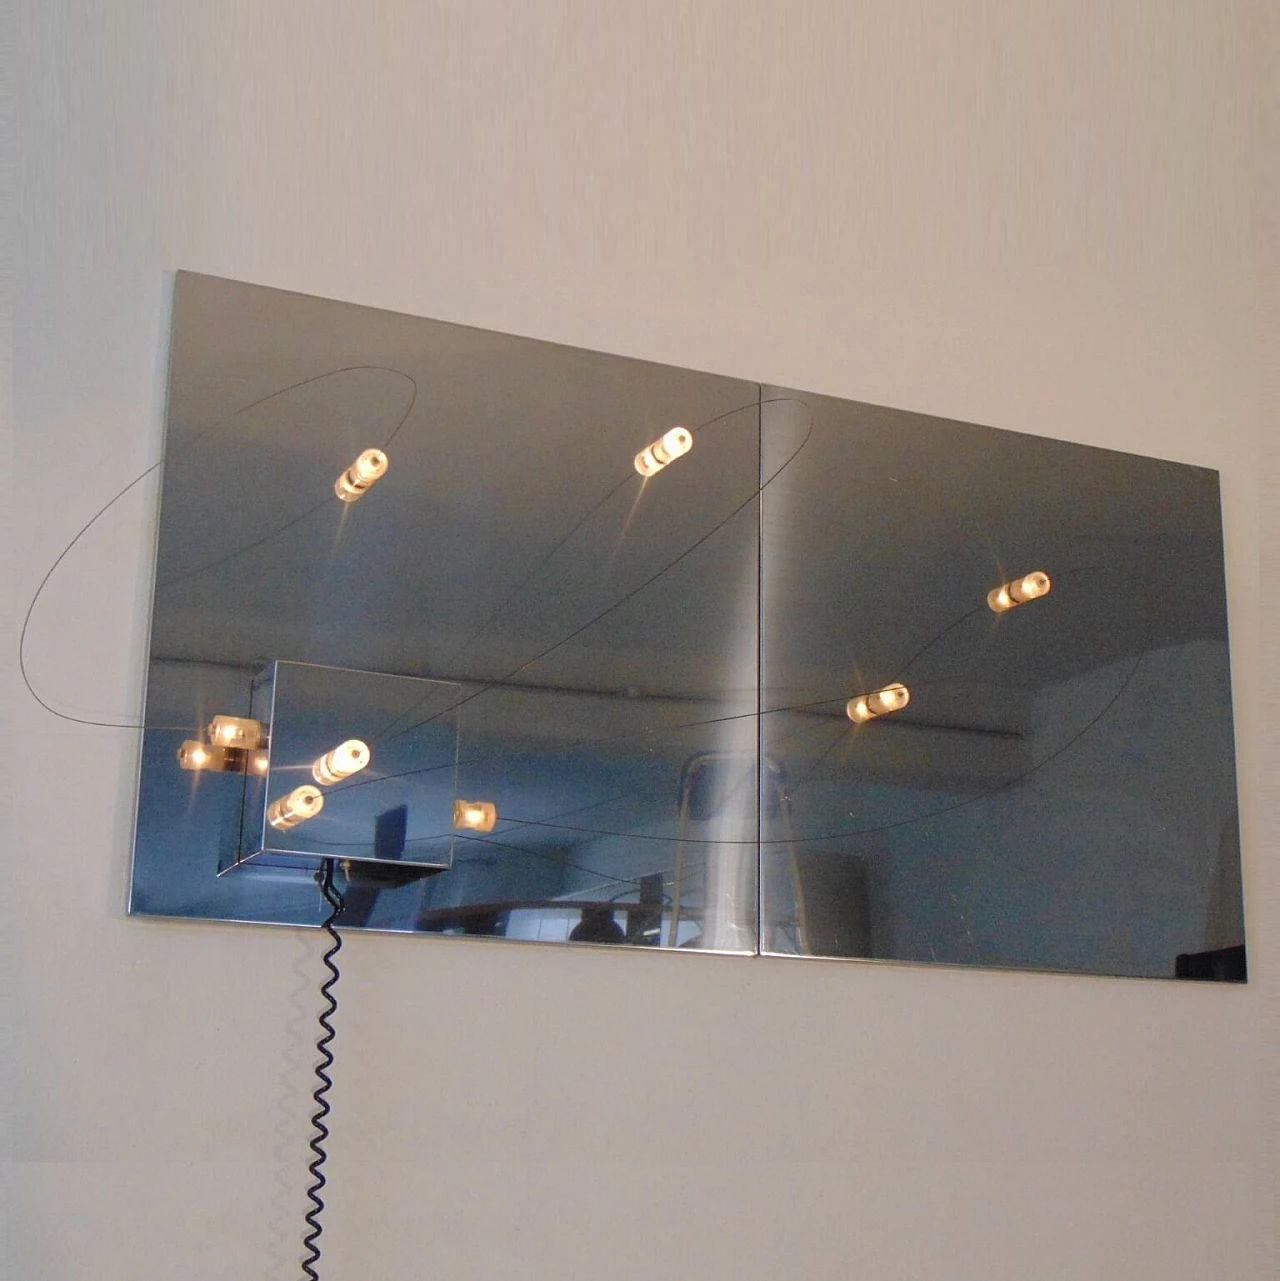 Mirrored Wall Lamp with Magnetic Movable Lights by ARDITI, Sormani Nucleo, Italy 1069174